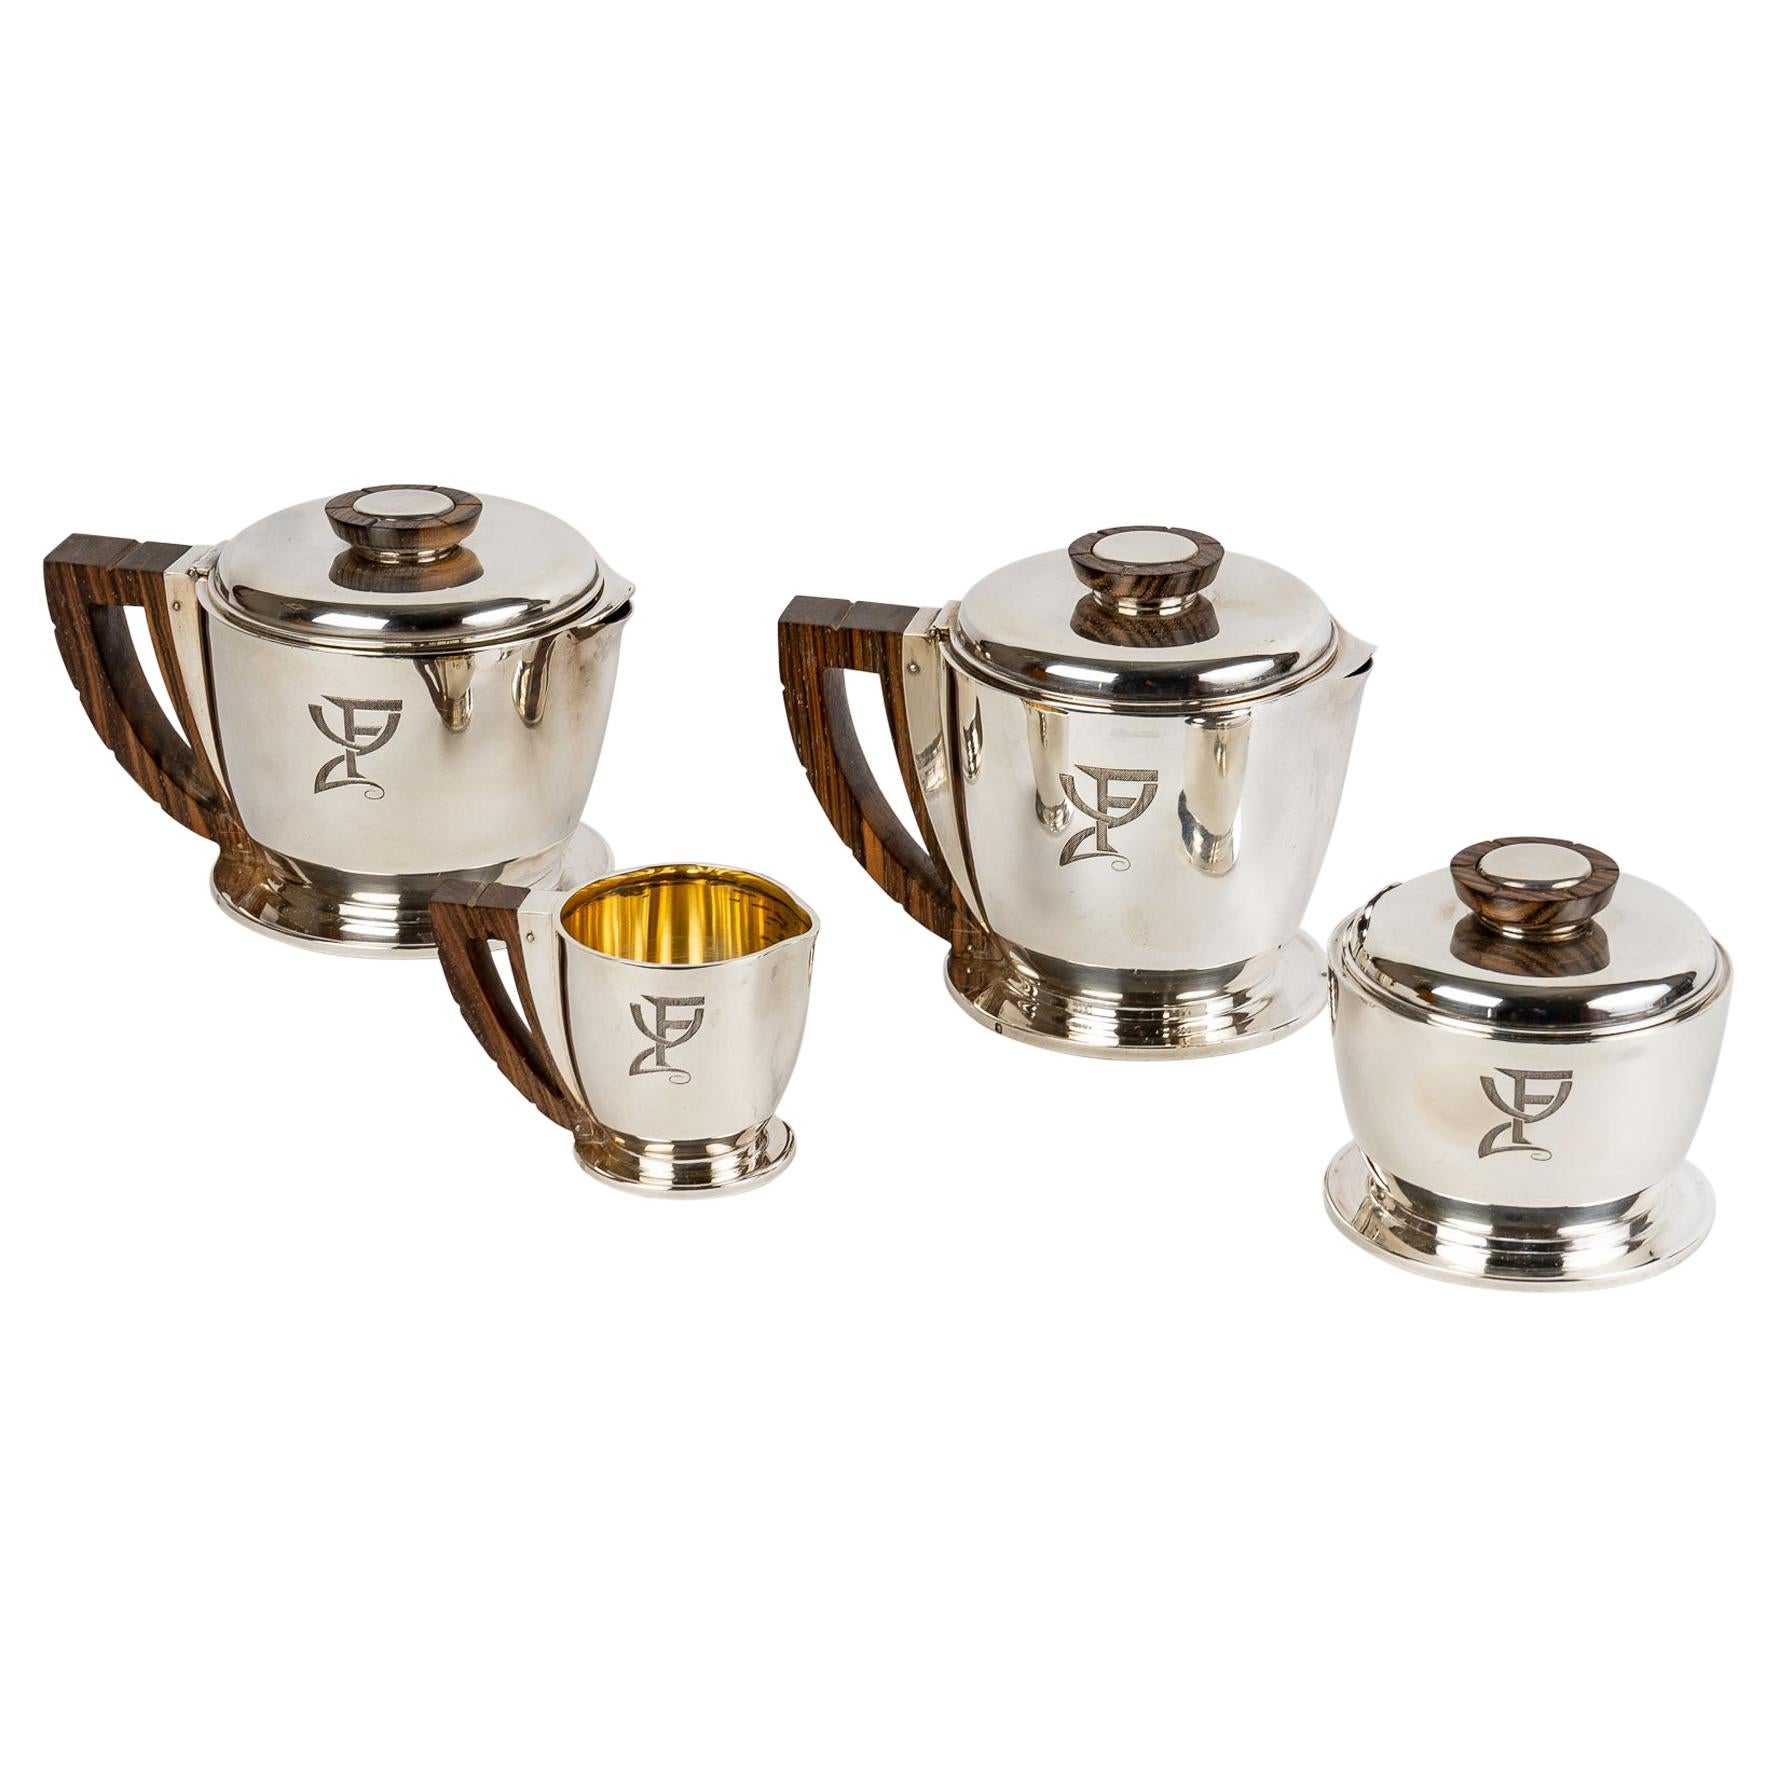 1920 Jean E. Puiforcat, Tea and Coffee Service in Sterling Silver and Macassar